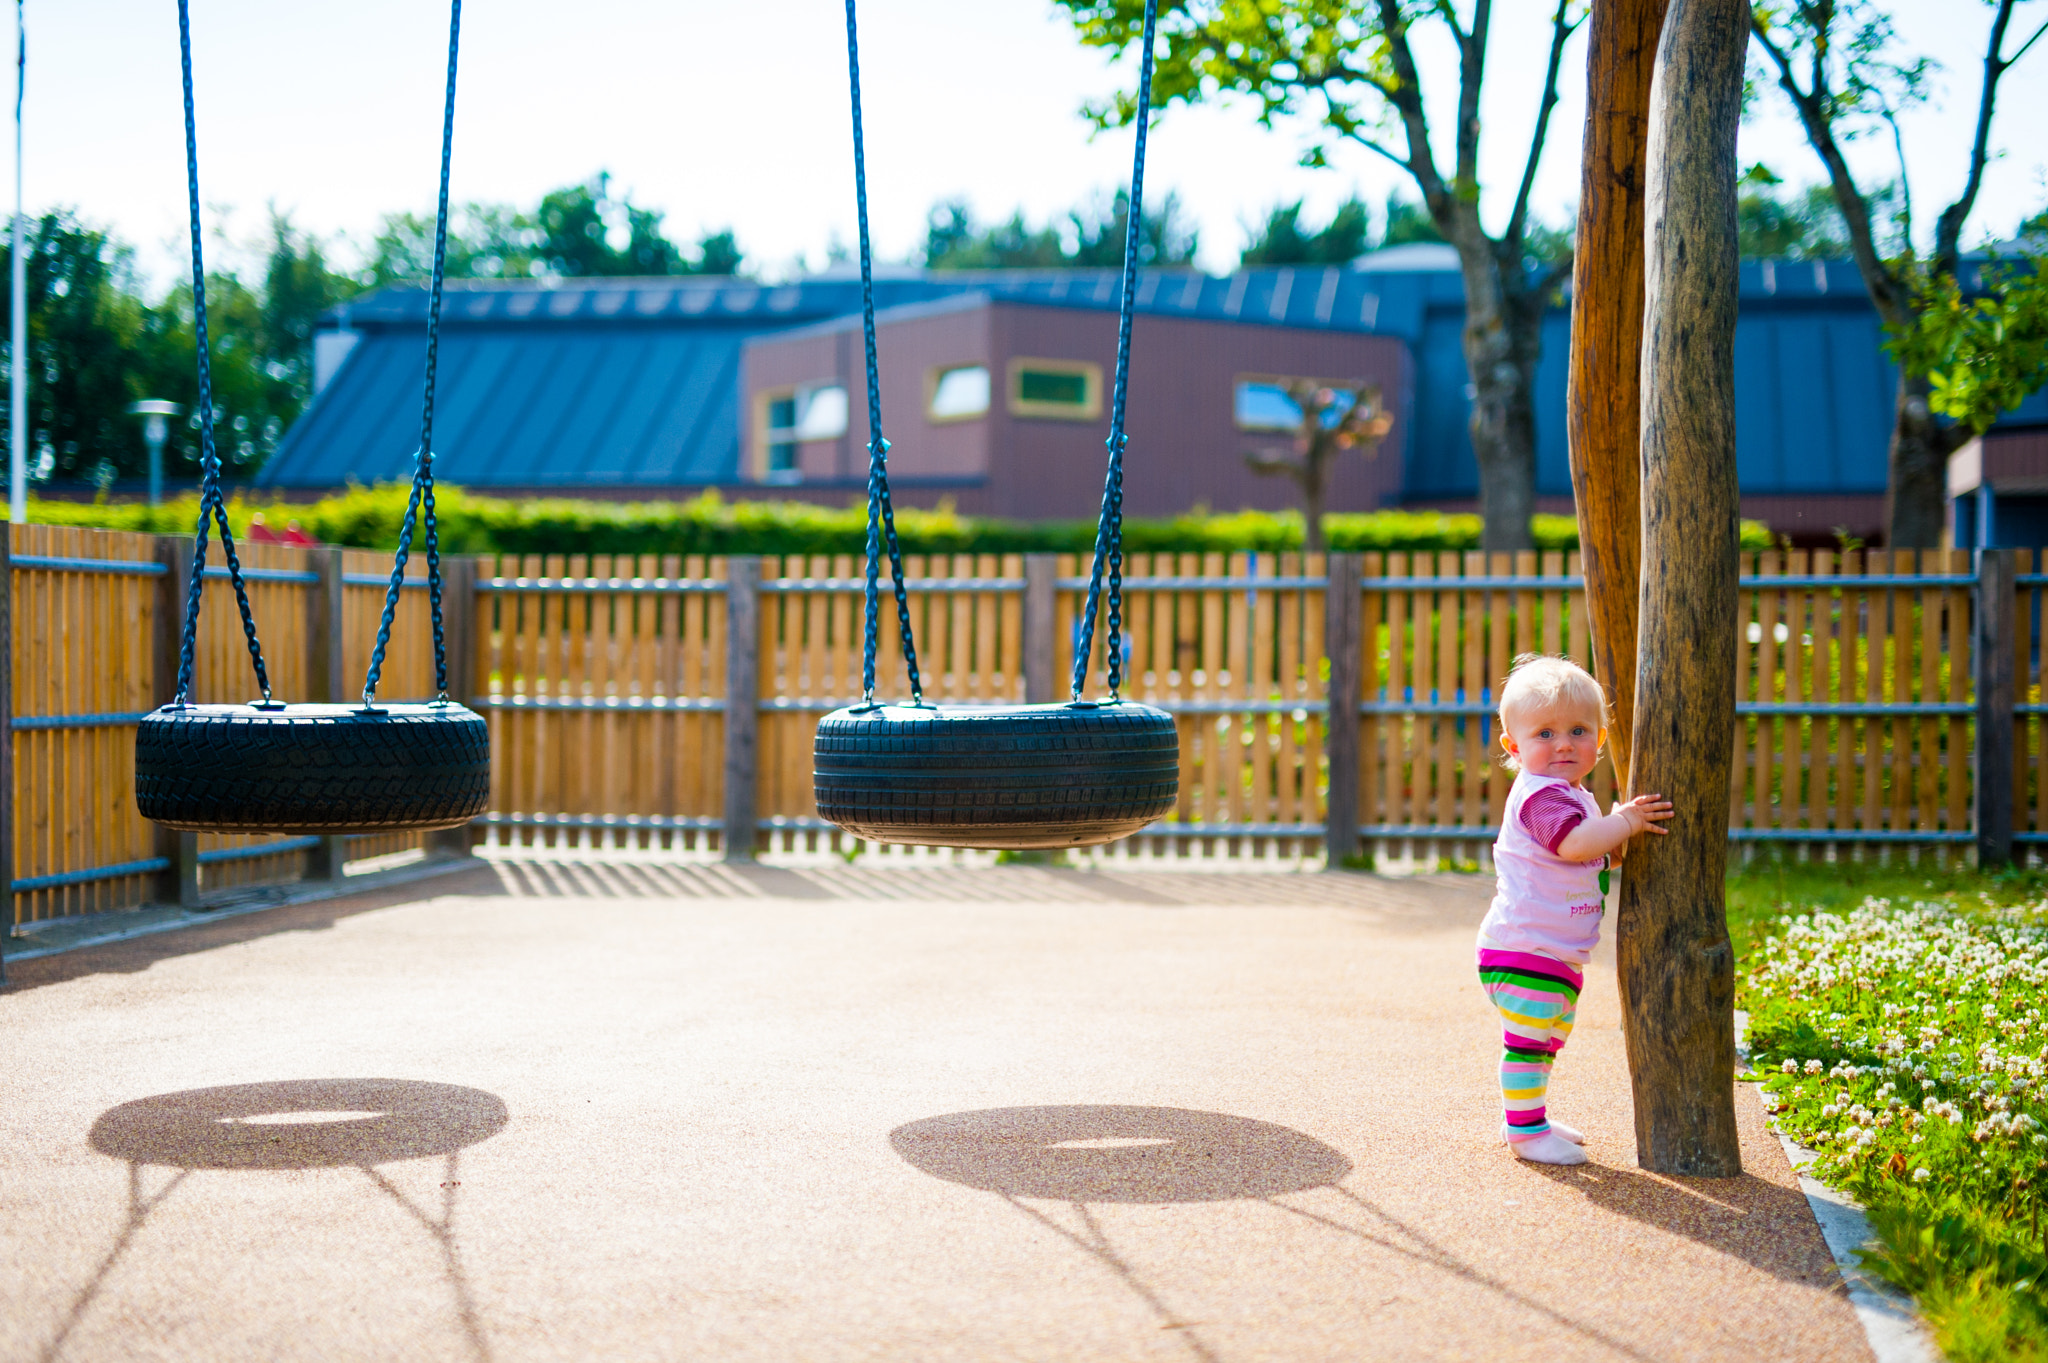 Nikon D700 + Sigma 50mm F1.4 DG HSM Art sample photo. Little princess checking out the playground photography